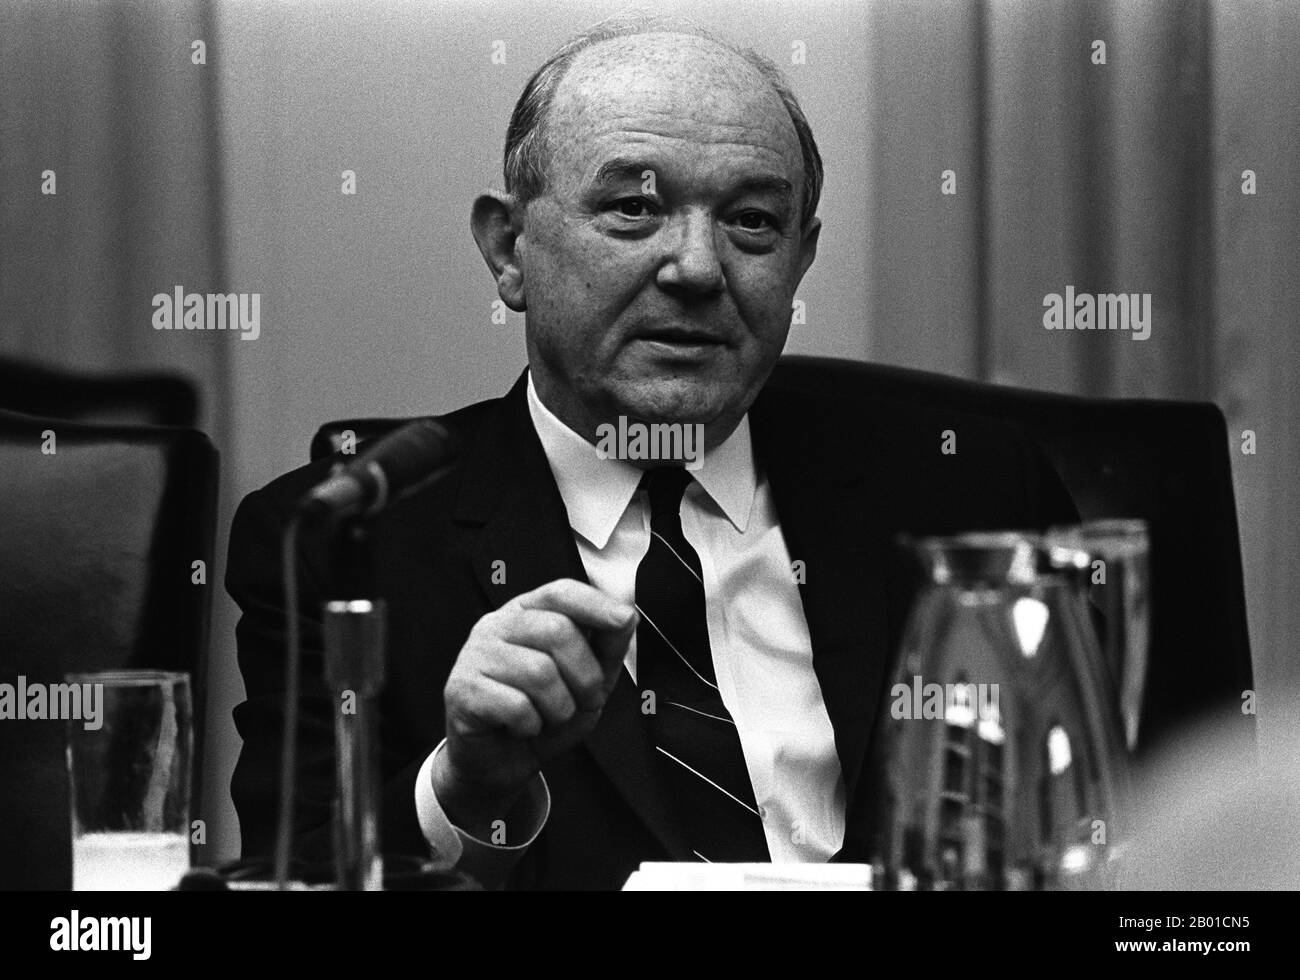 USA: David Dean Rusk (9 February 1909 - 20 December 1994), 54th Secretary of State (1961-1969) under presidents John F. Kennedy and Lyndon B. Johnson.  Photo by Yoichi Okamoto (1915-1985, public domain), 16 September 1968.  On 12 December 1960, Democratic President-elect John F. Kennedy appointed Rusk Secretary of State. As Secretary of State, Rusk believed in the use of military action to combat Communism. Despite private misgivings about the Bay of Pigs invasion, he remained noncommittal during the Executive Council meetings leading up to the attack and never opposed it outright. Stock Photo